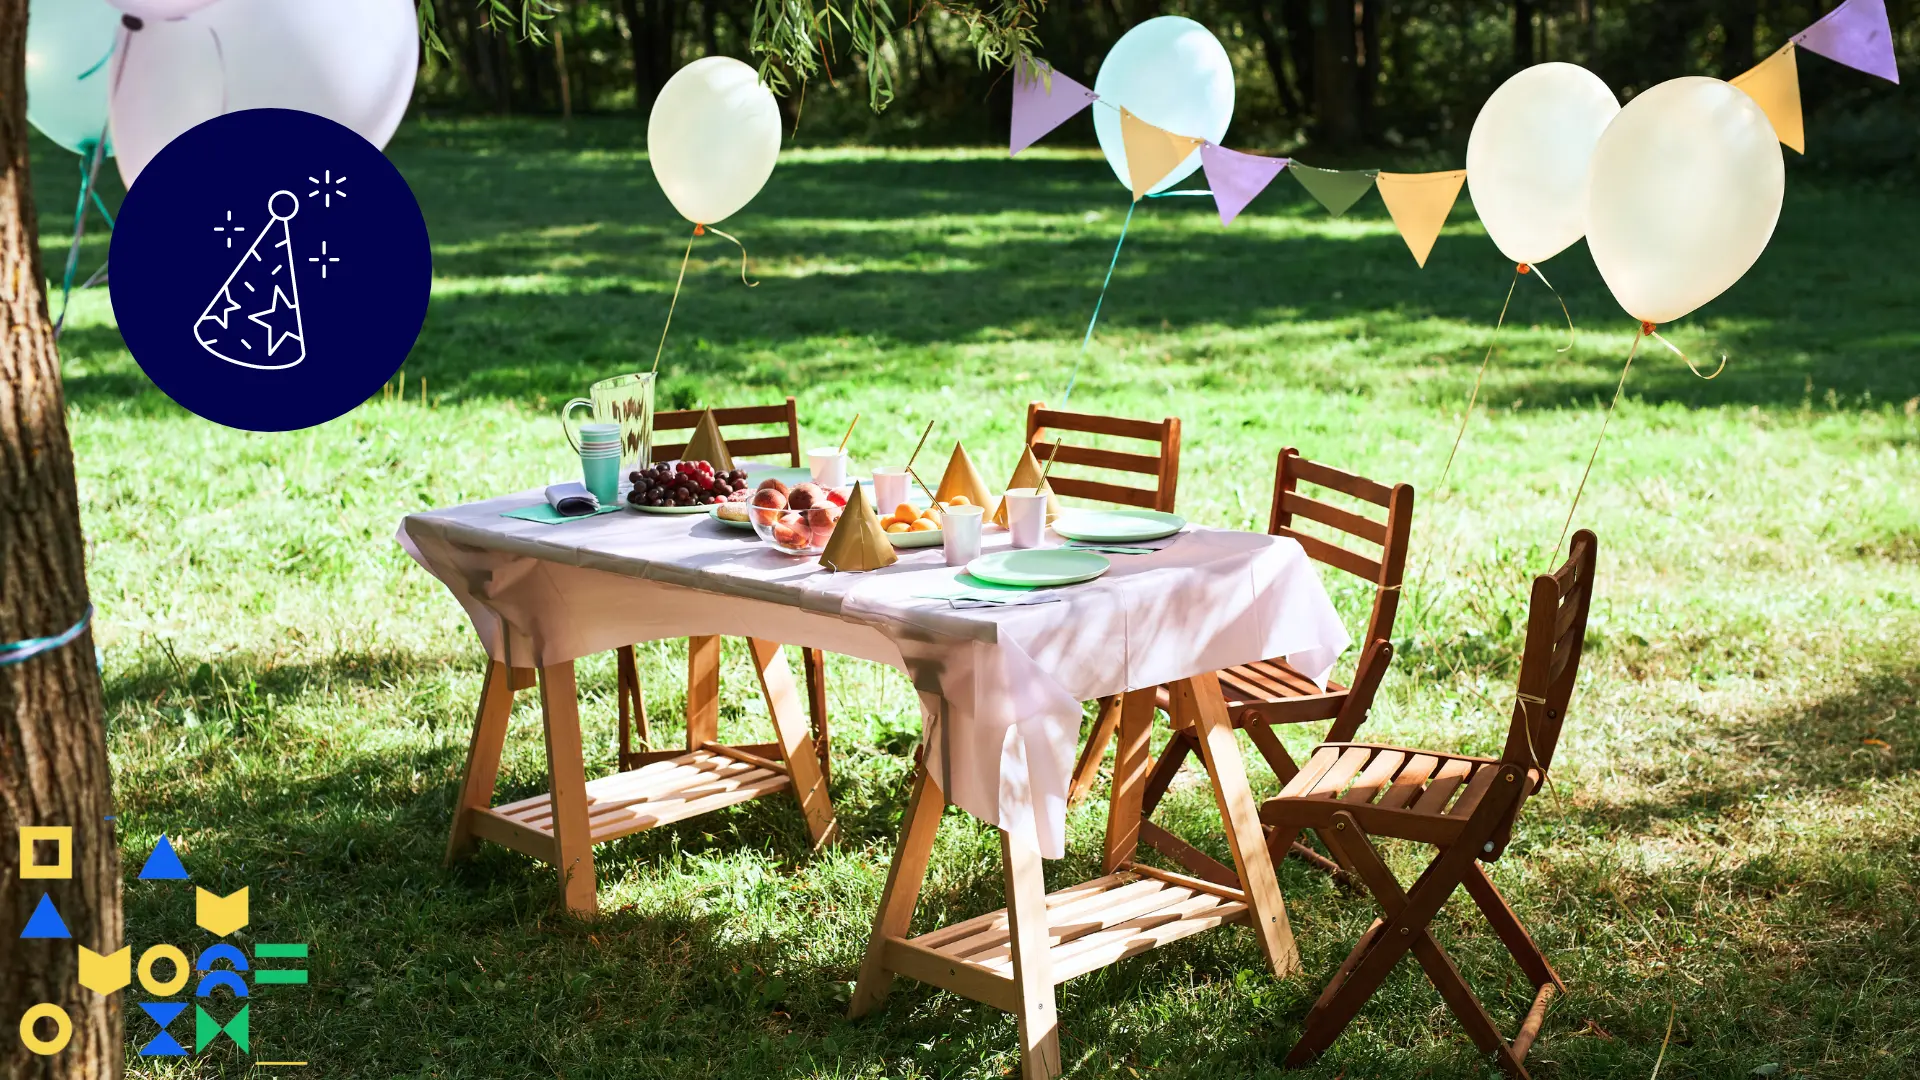 Image of a wood table and chairs outdoors in a yard with balloons and banners and party hats and food representing an affordable kid's birthday party